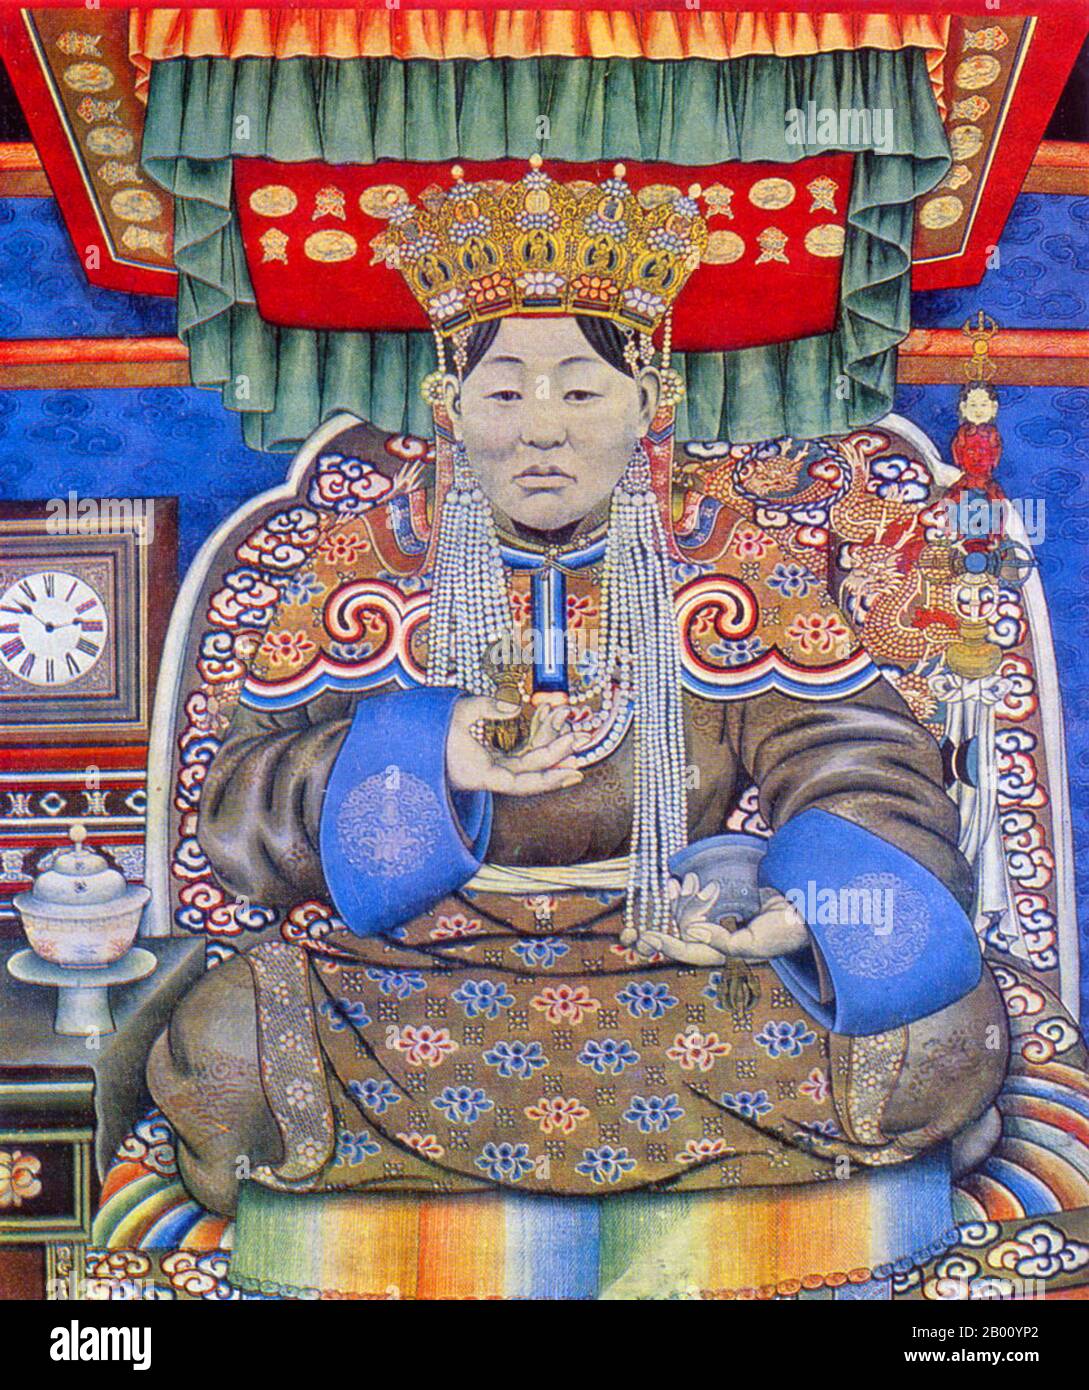 Mongolia: Tsendiin Dondogdulam (1876-1923), wife of the Eighth Jebtsundamba Khutugtu Bogd Khan, last monarchic ruler of Mongolia. Painting by Marzan Sharav (1869-1939), 1924.  The Bogd Khan (c. 1869-1924) was simultaneously the religious and secular head of the Mongolian state until the 1920s. Ikh Huree, as Ulan Bator was then known, was the seat of the preeminent living Buddha of Mongolia (the Jebtsundamba Khutuktu, also known as the Bogdo Gegen and later as Bogd Khan), who ranked third in the Lamaist-Buddhist ecclesiastical hierarchy, after the Dalai Lama and the Panchen Lama. Stock Photo